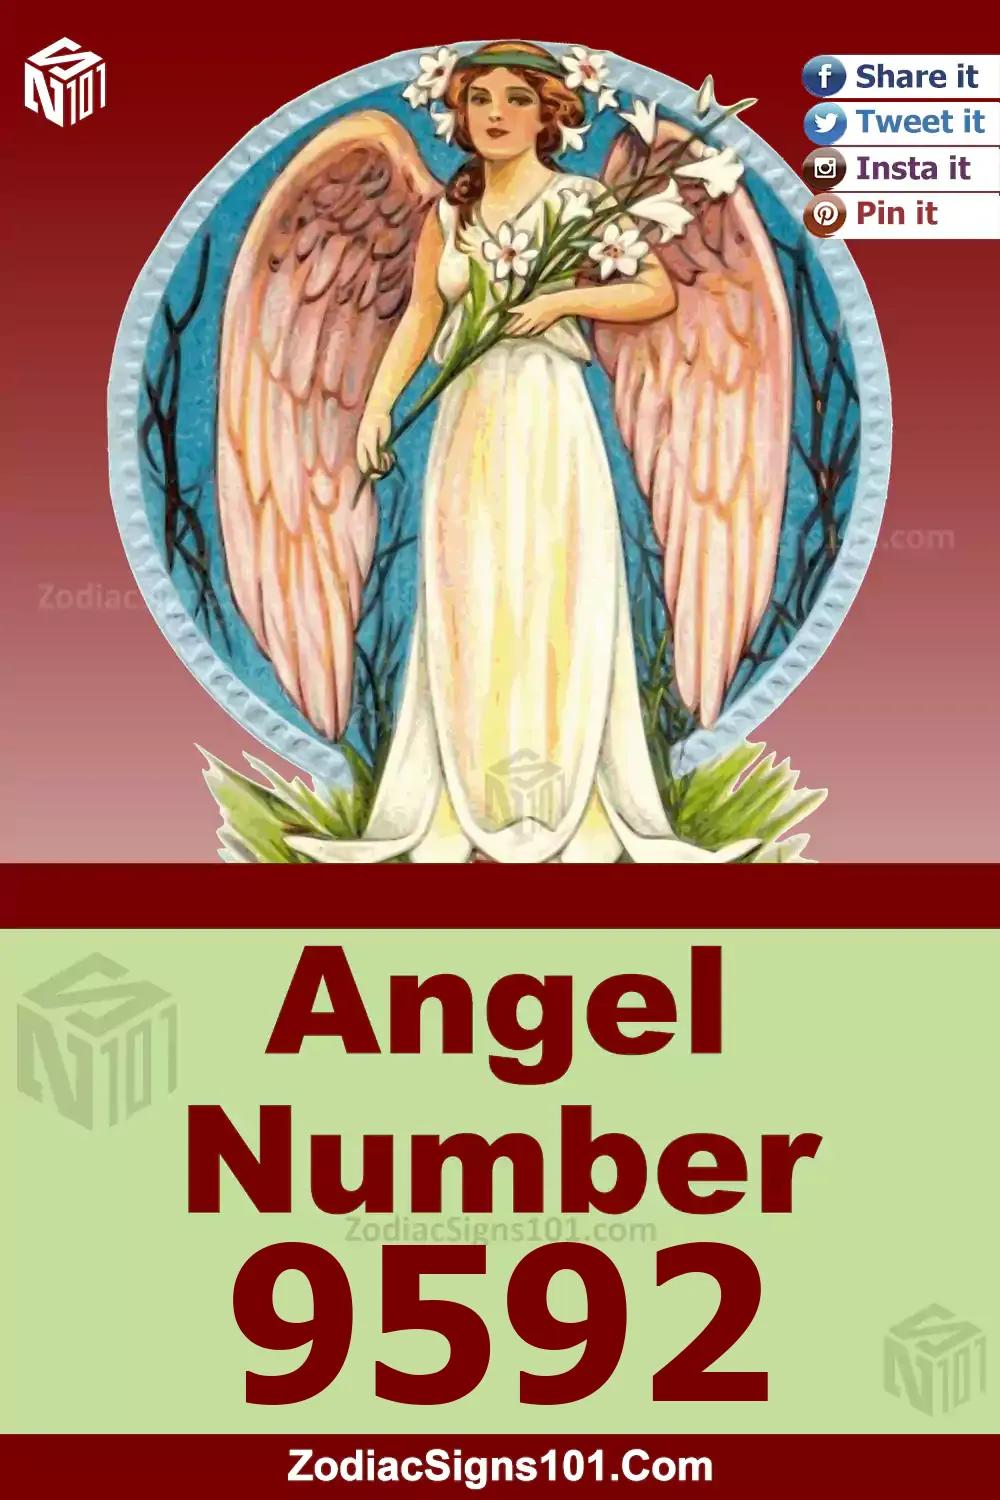 9592 Angel Number Meaning